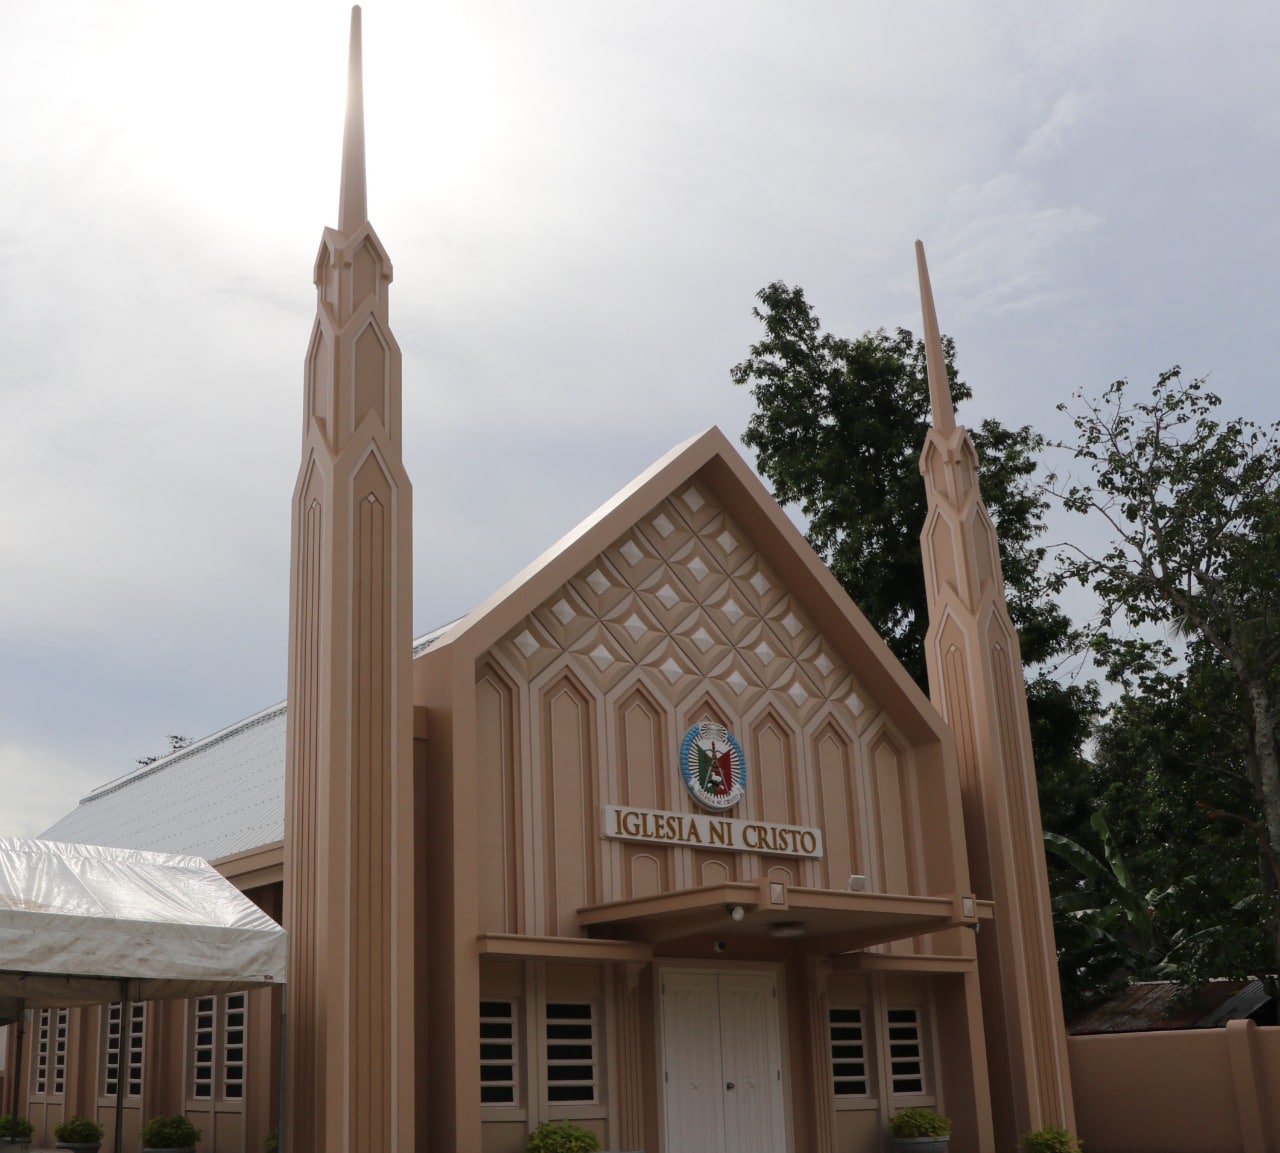 Aguisan house of worship fully renovated, rededicated to God